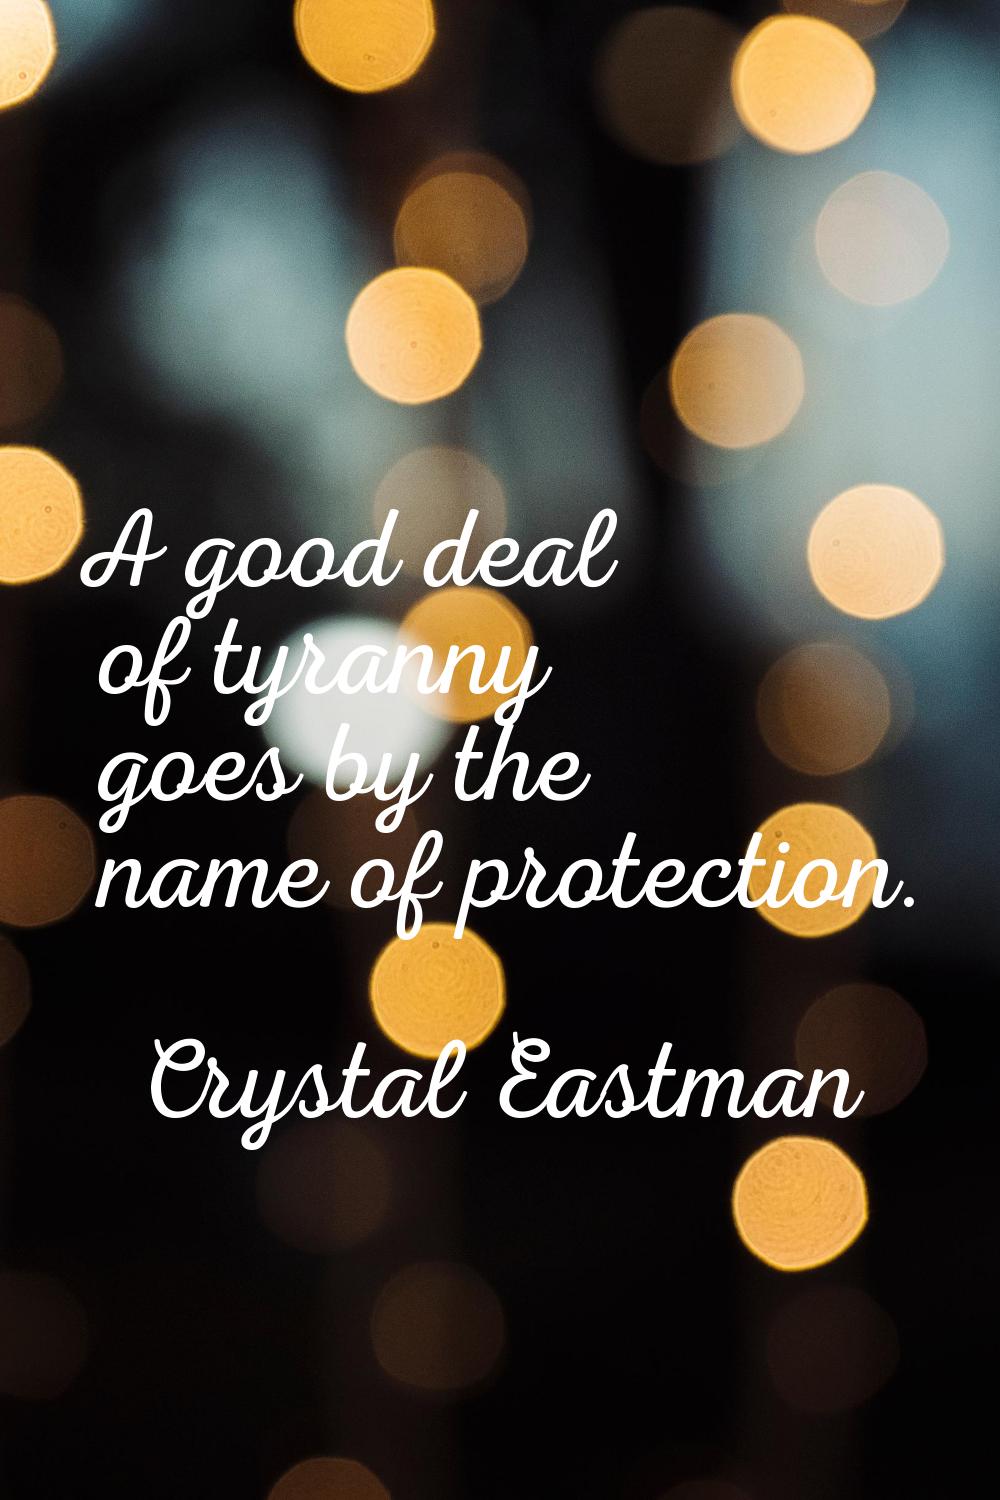 A good deal of tyranny goes by the name of protection.